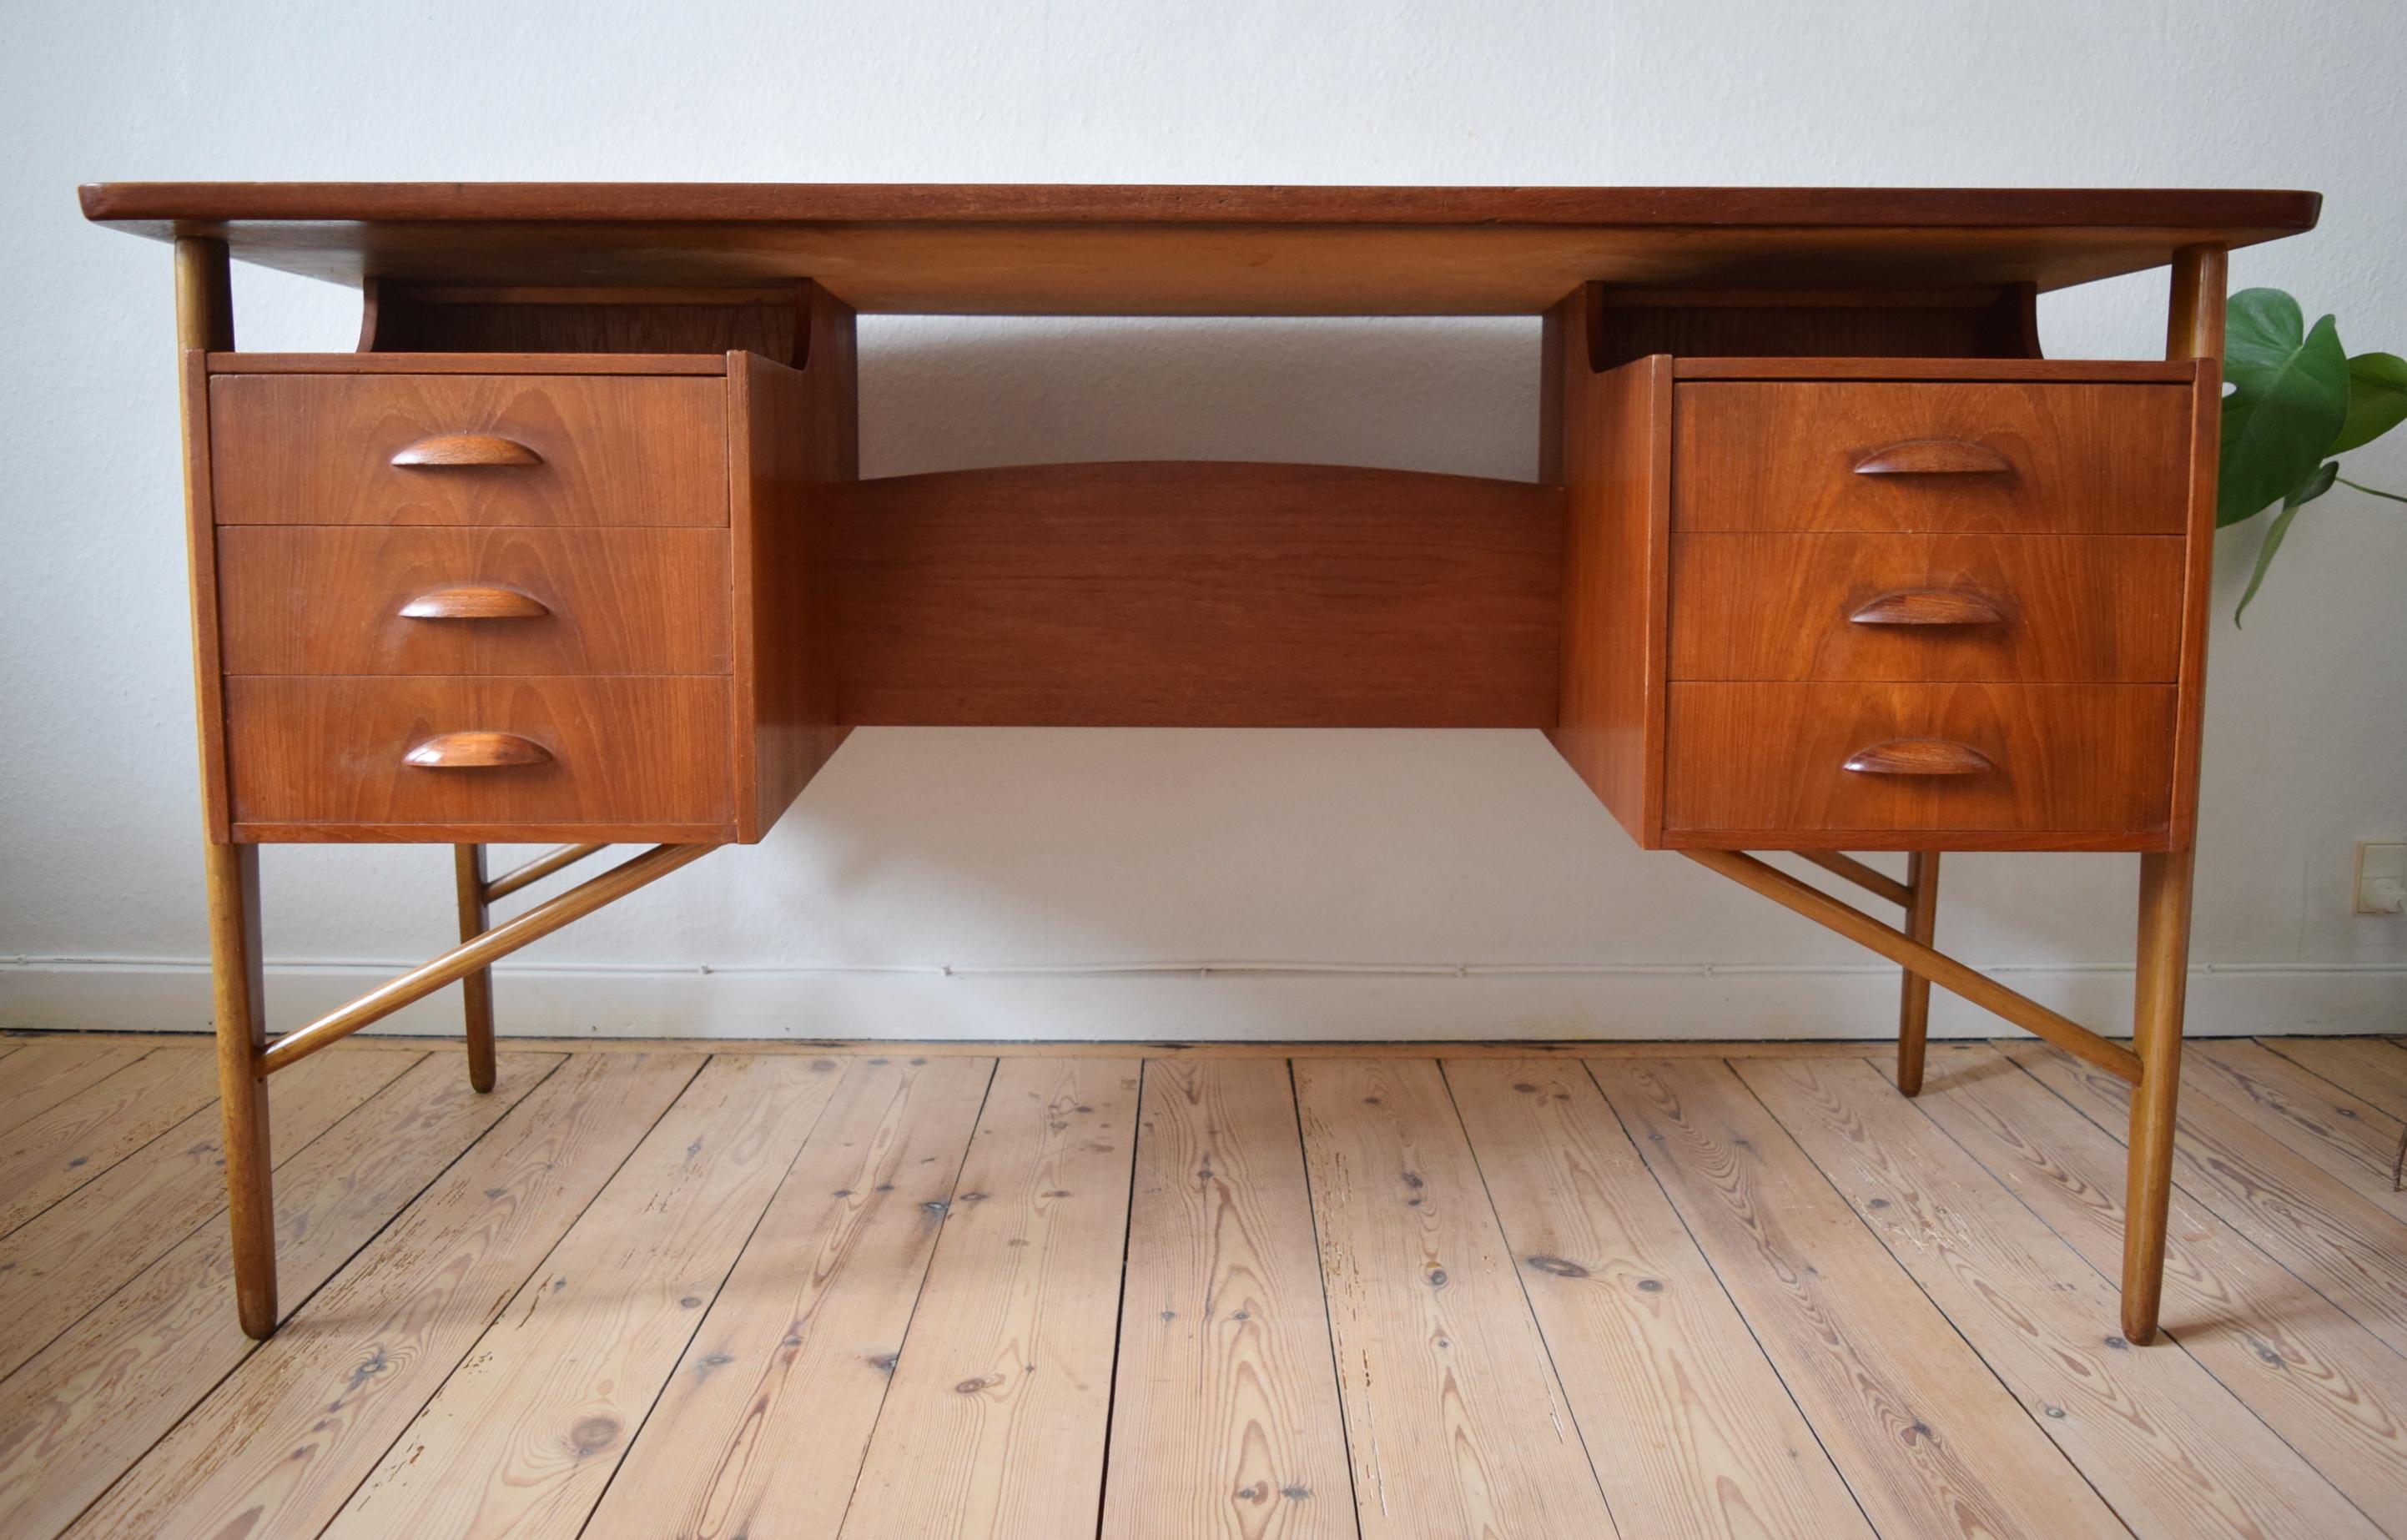 This teak desk was designed in the 1950s by Svend Aage Madsen for Sigurd Hansen. It features a curved top with a bevelled rear and side edges. Below there are six drawers with orange slice handles, and on the rear are two storage compartments and a